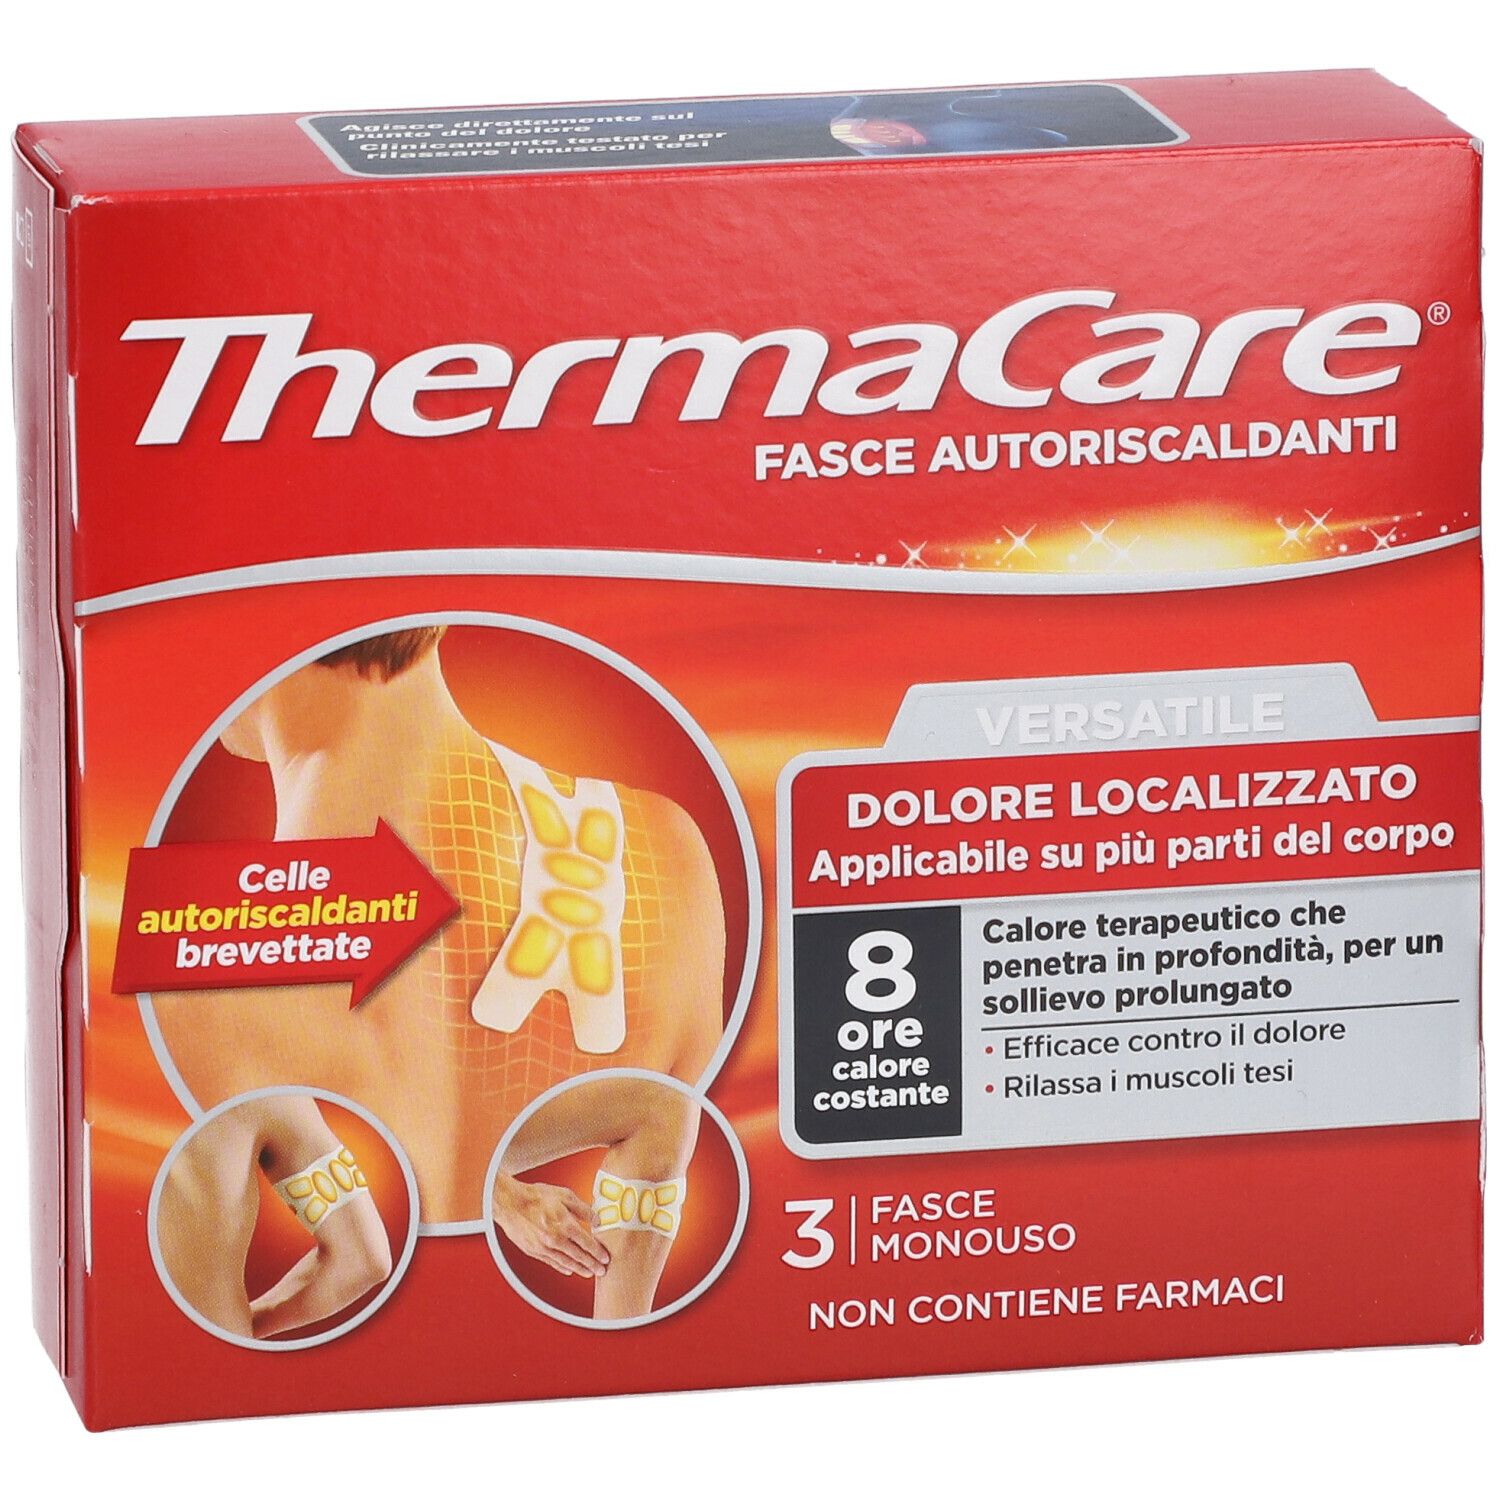 ThermaCare® Versatile